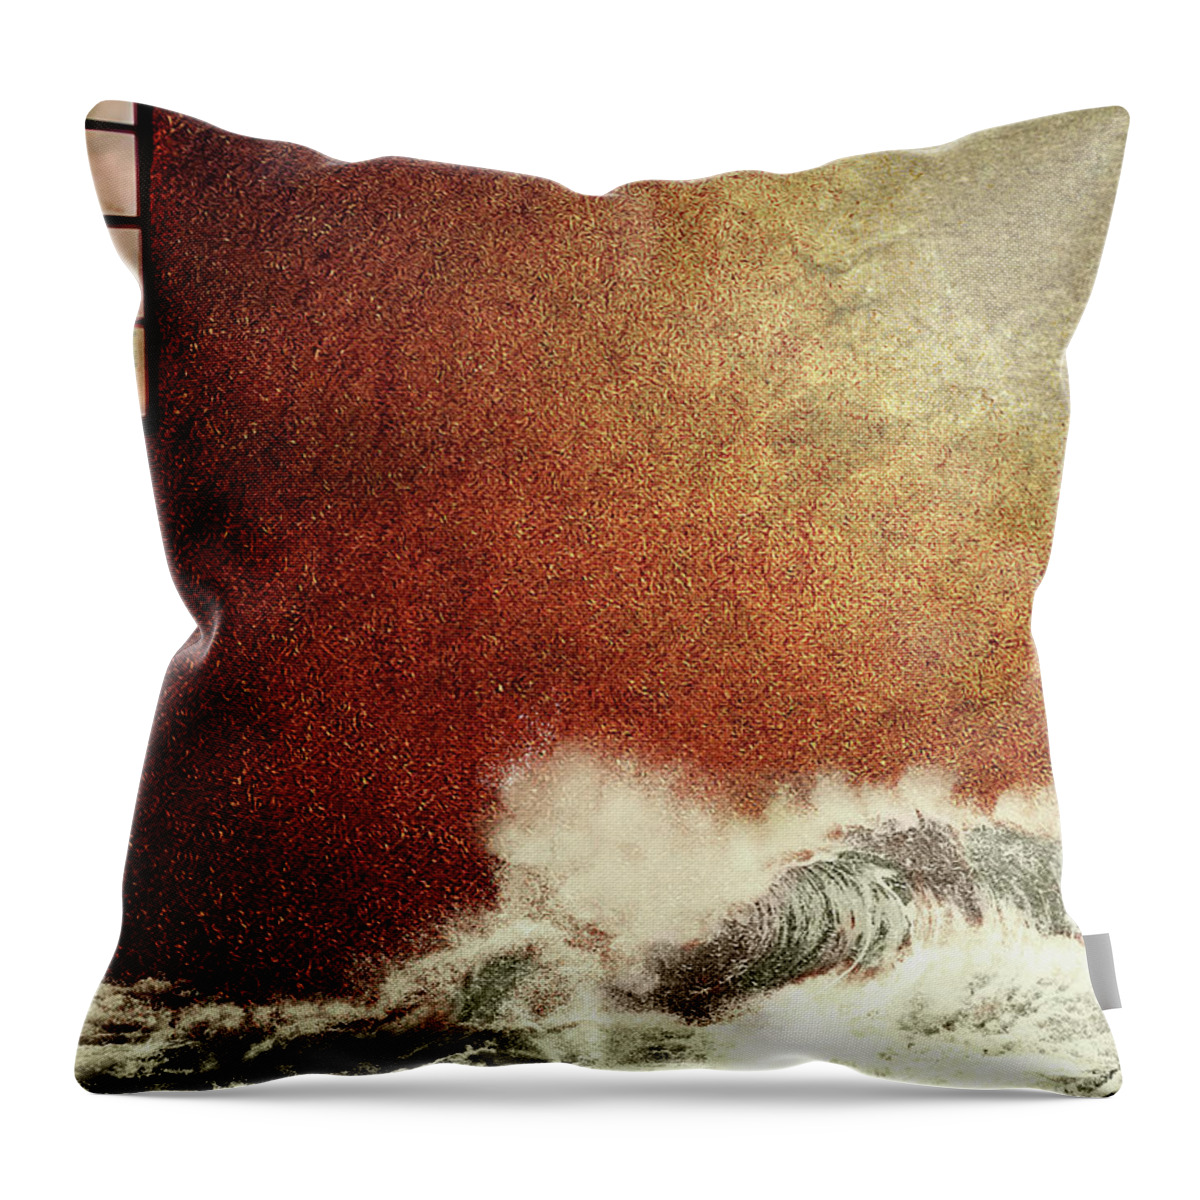 Orange Throw Pillow featuring the digital art Storm Against the Walls by Amy Shaw